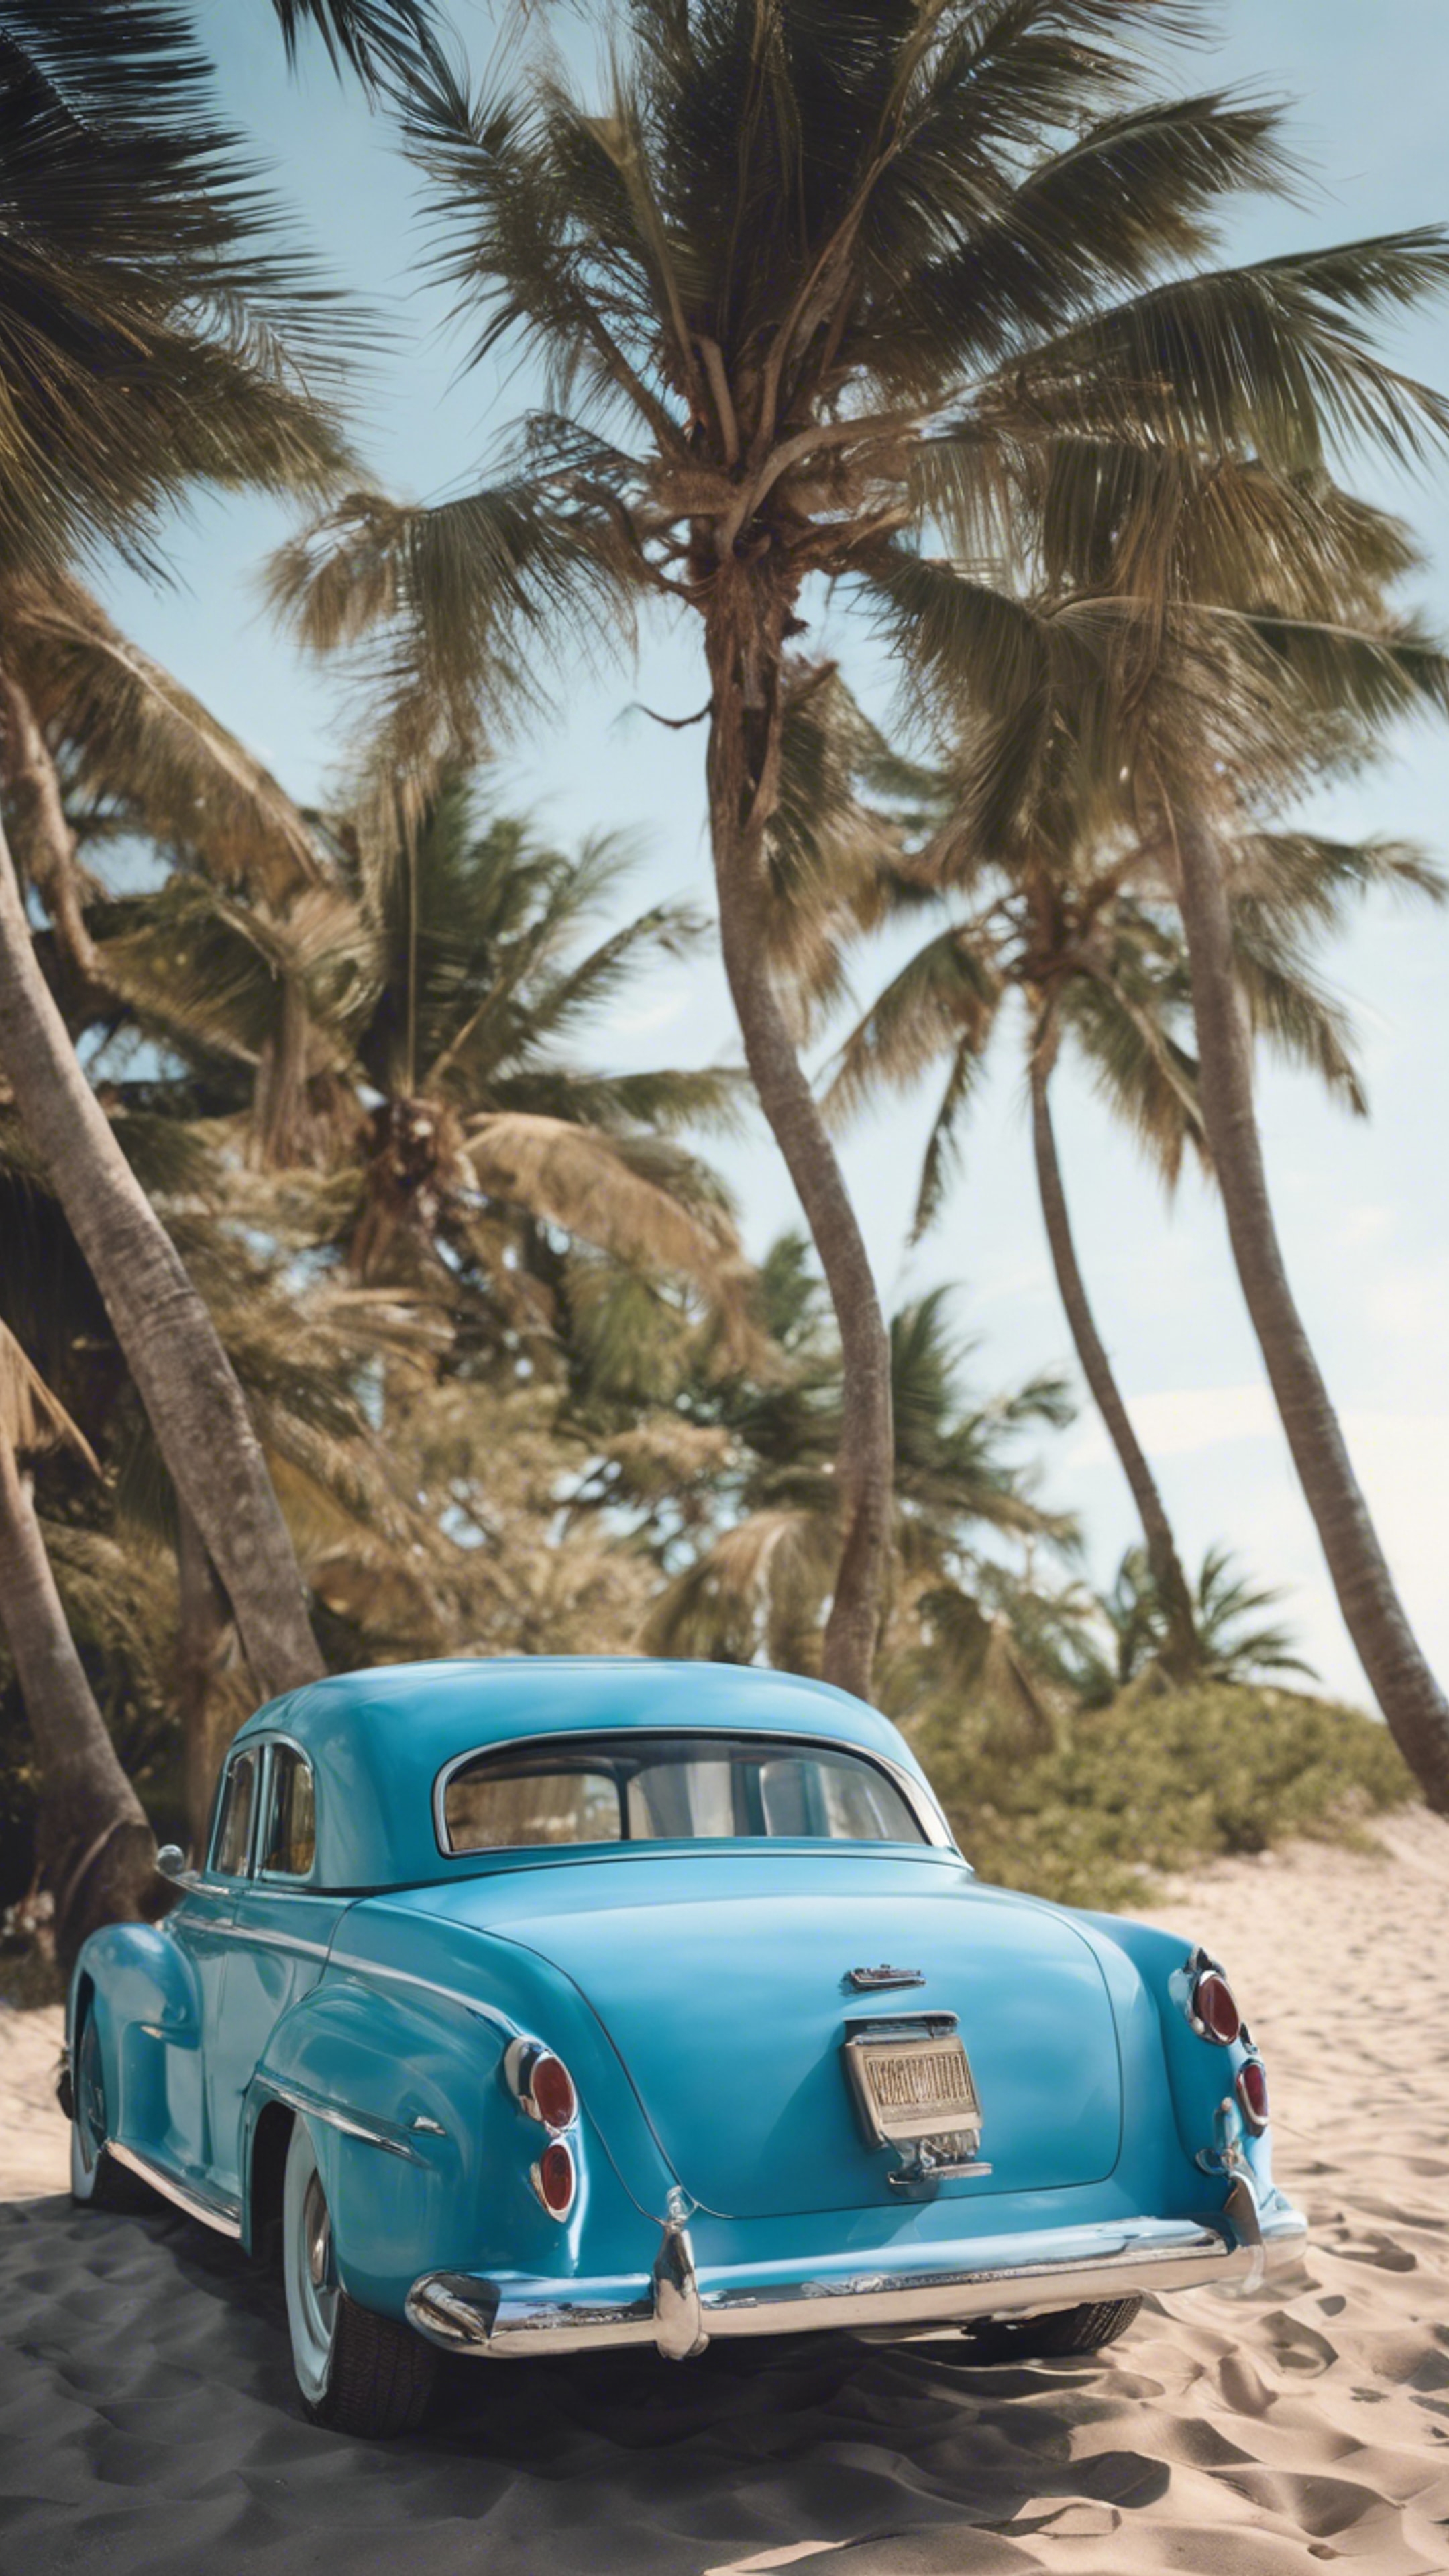 A vintage car painted in cool blue, parked by the beach 벽지[7559f4037ca44818afd1]